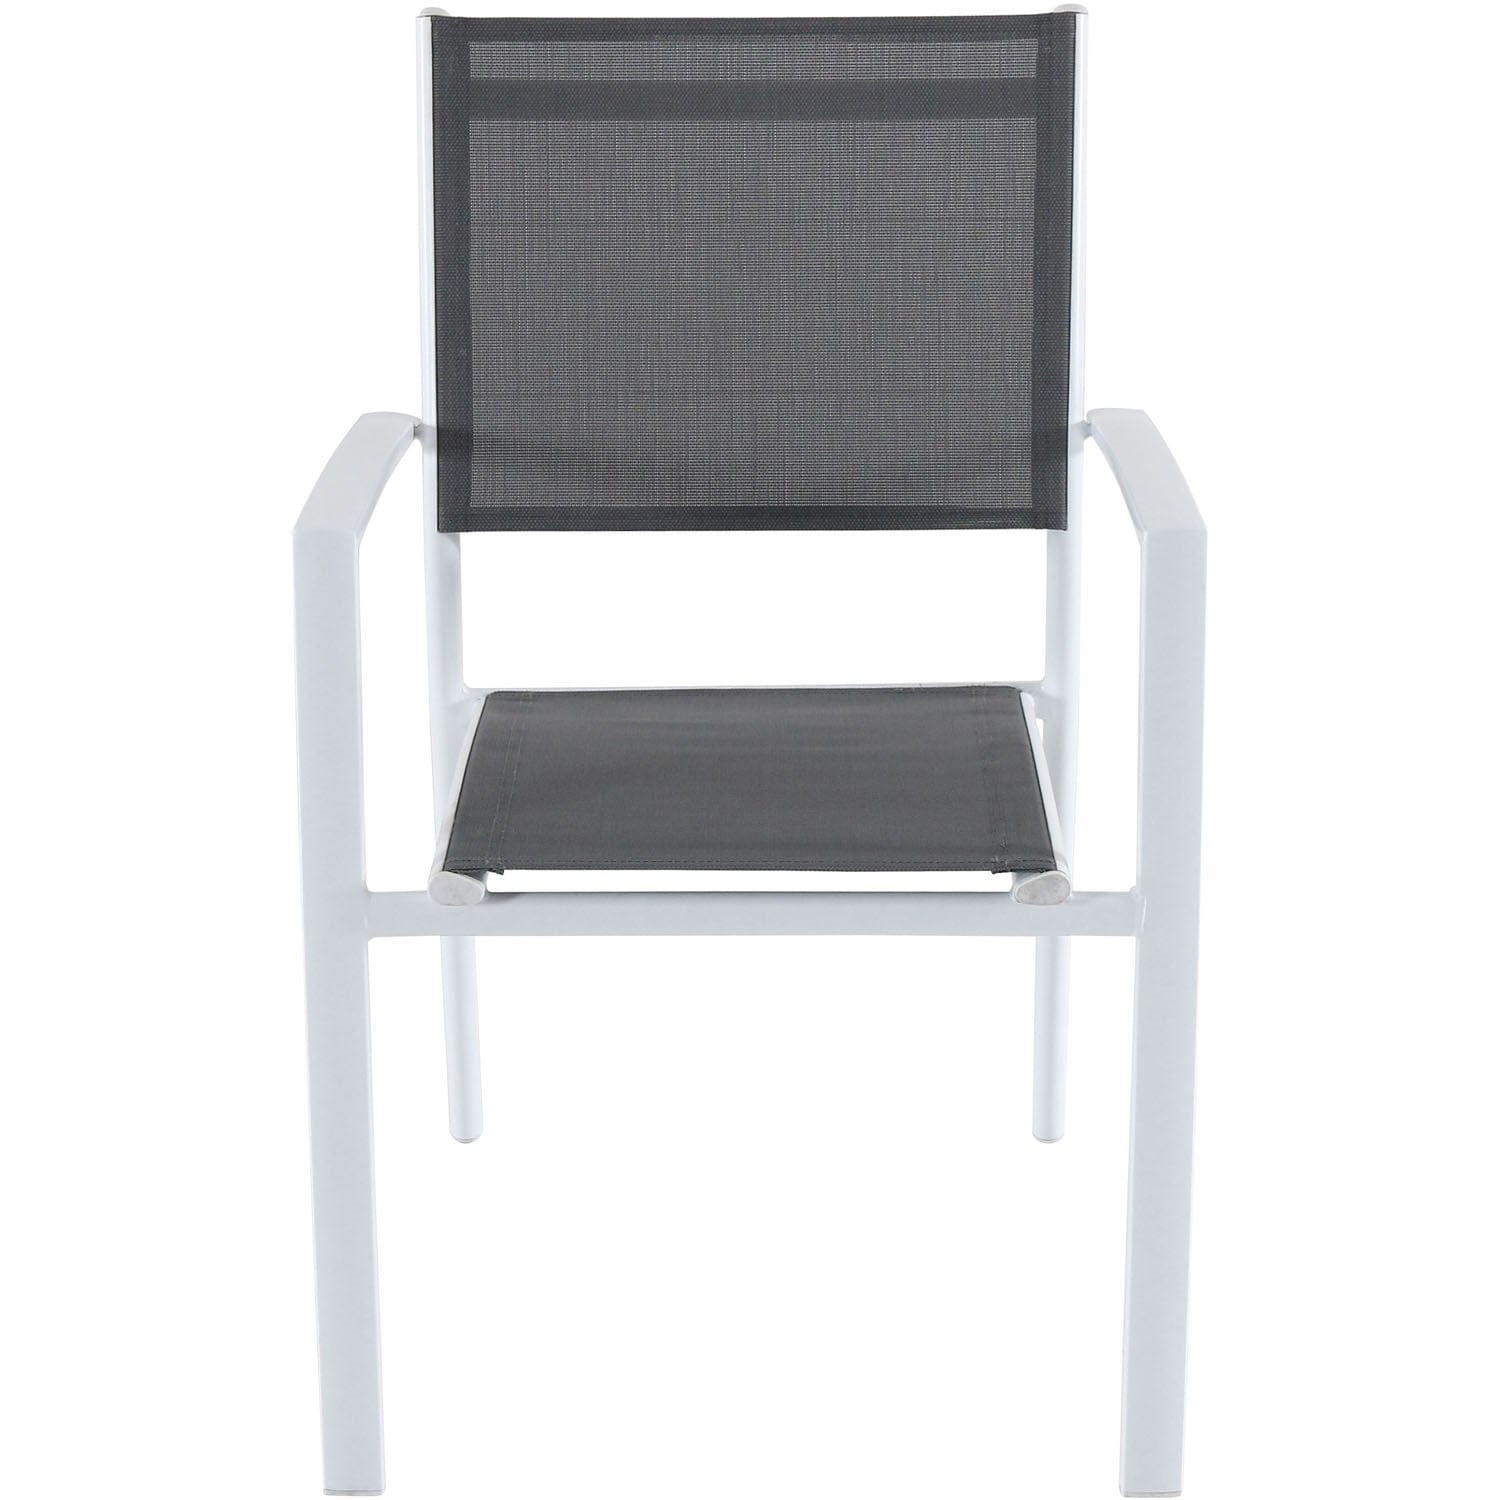 Hanover Outdoor Dining Set Hanover Naples 7-Piece Outdoor Dining Set with 6 Sling Chairs in Gray/White and a 63" x 35" Dining Table